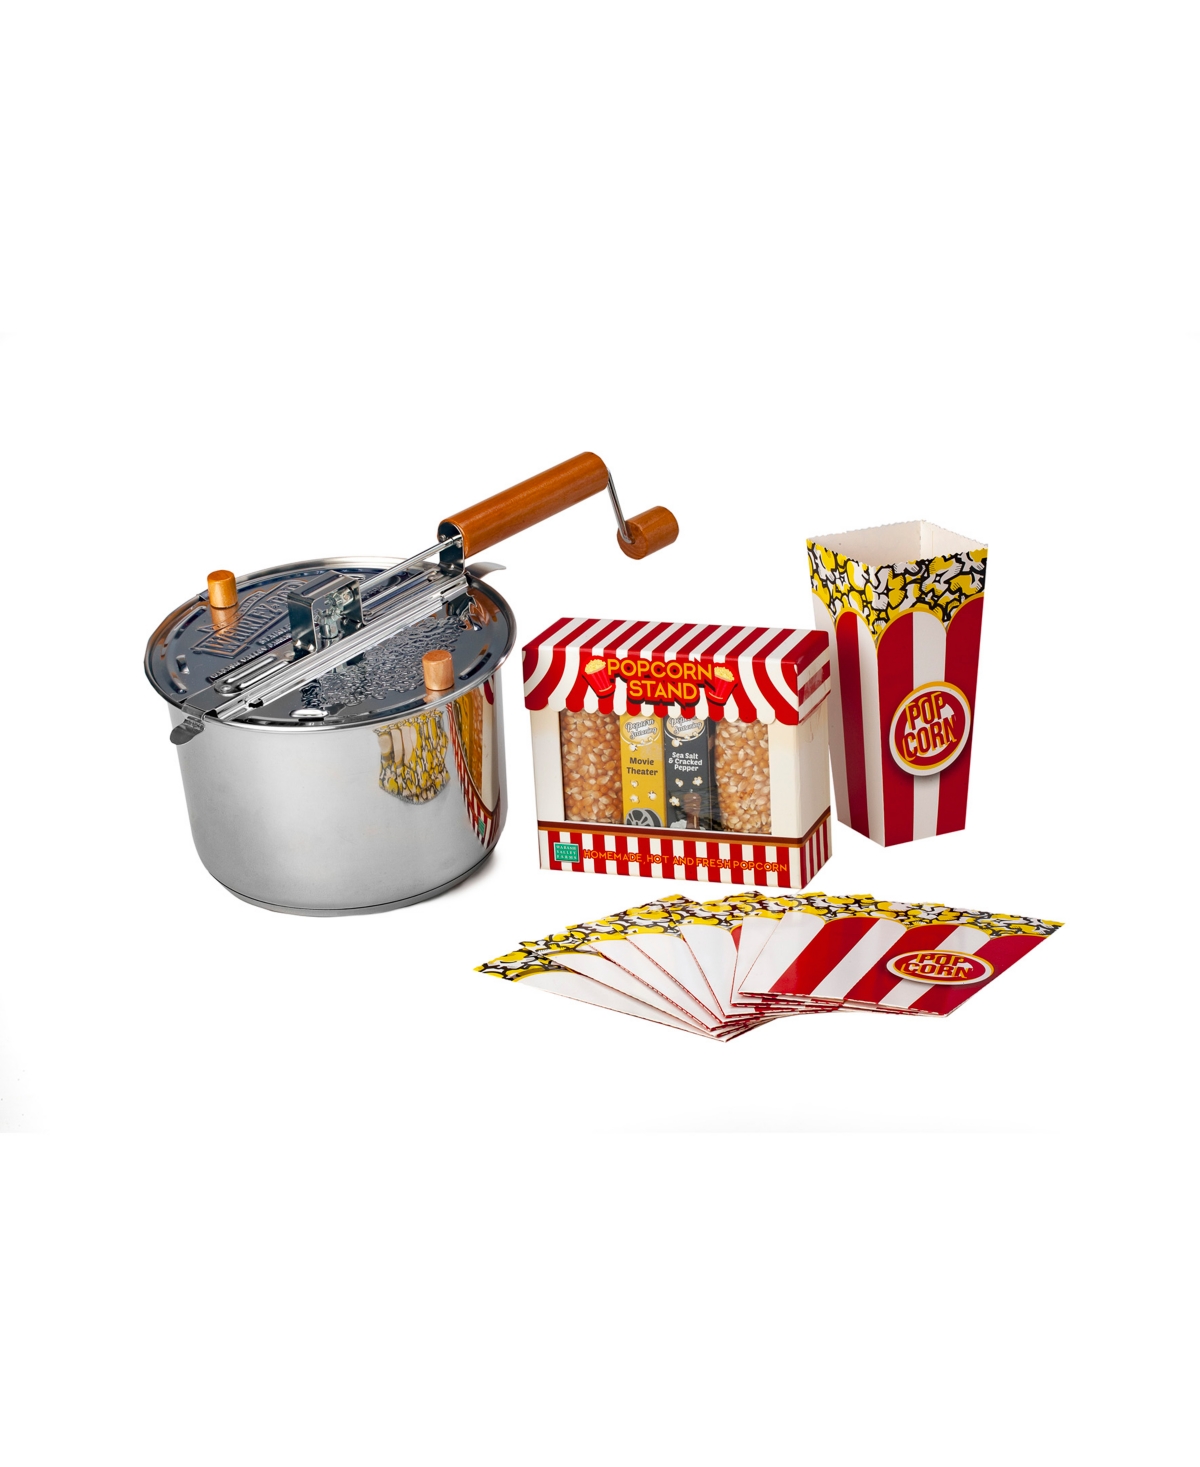 Wabash Valley Farms Old Fashioned Popcorn Stand Popping Kit Featuring Whirley-pop Stovetop Popper, Set Of 13